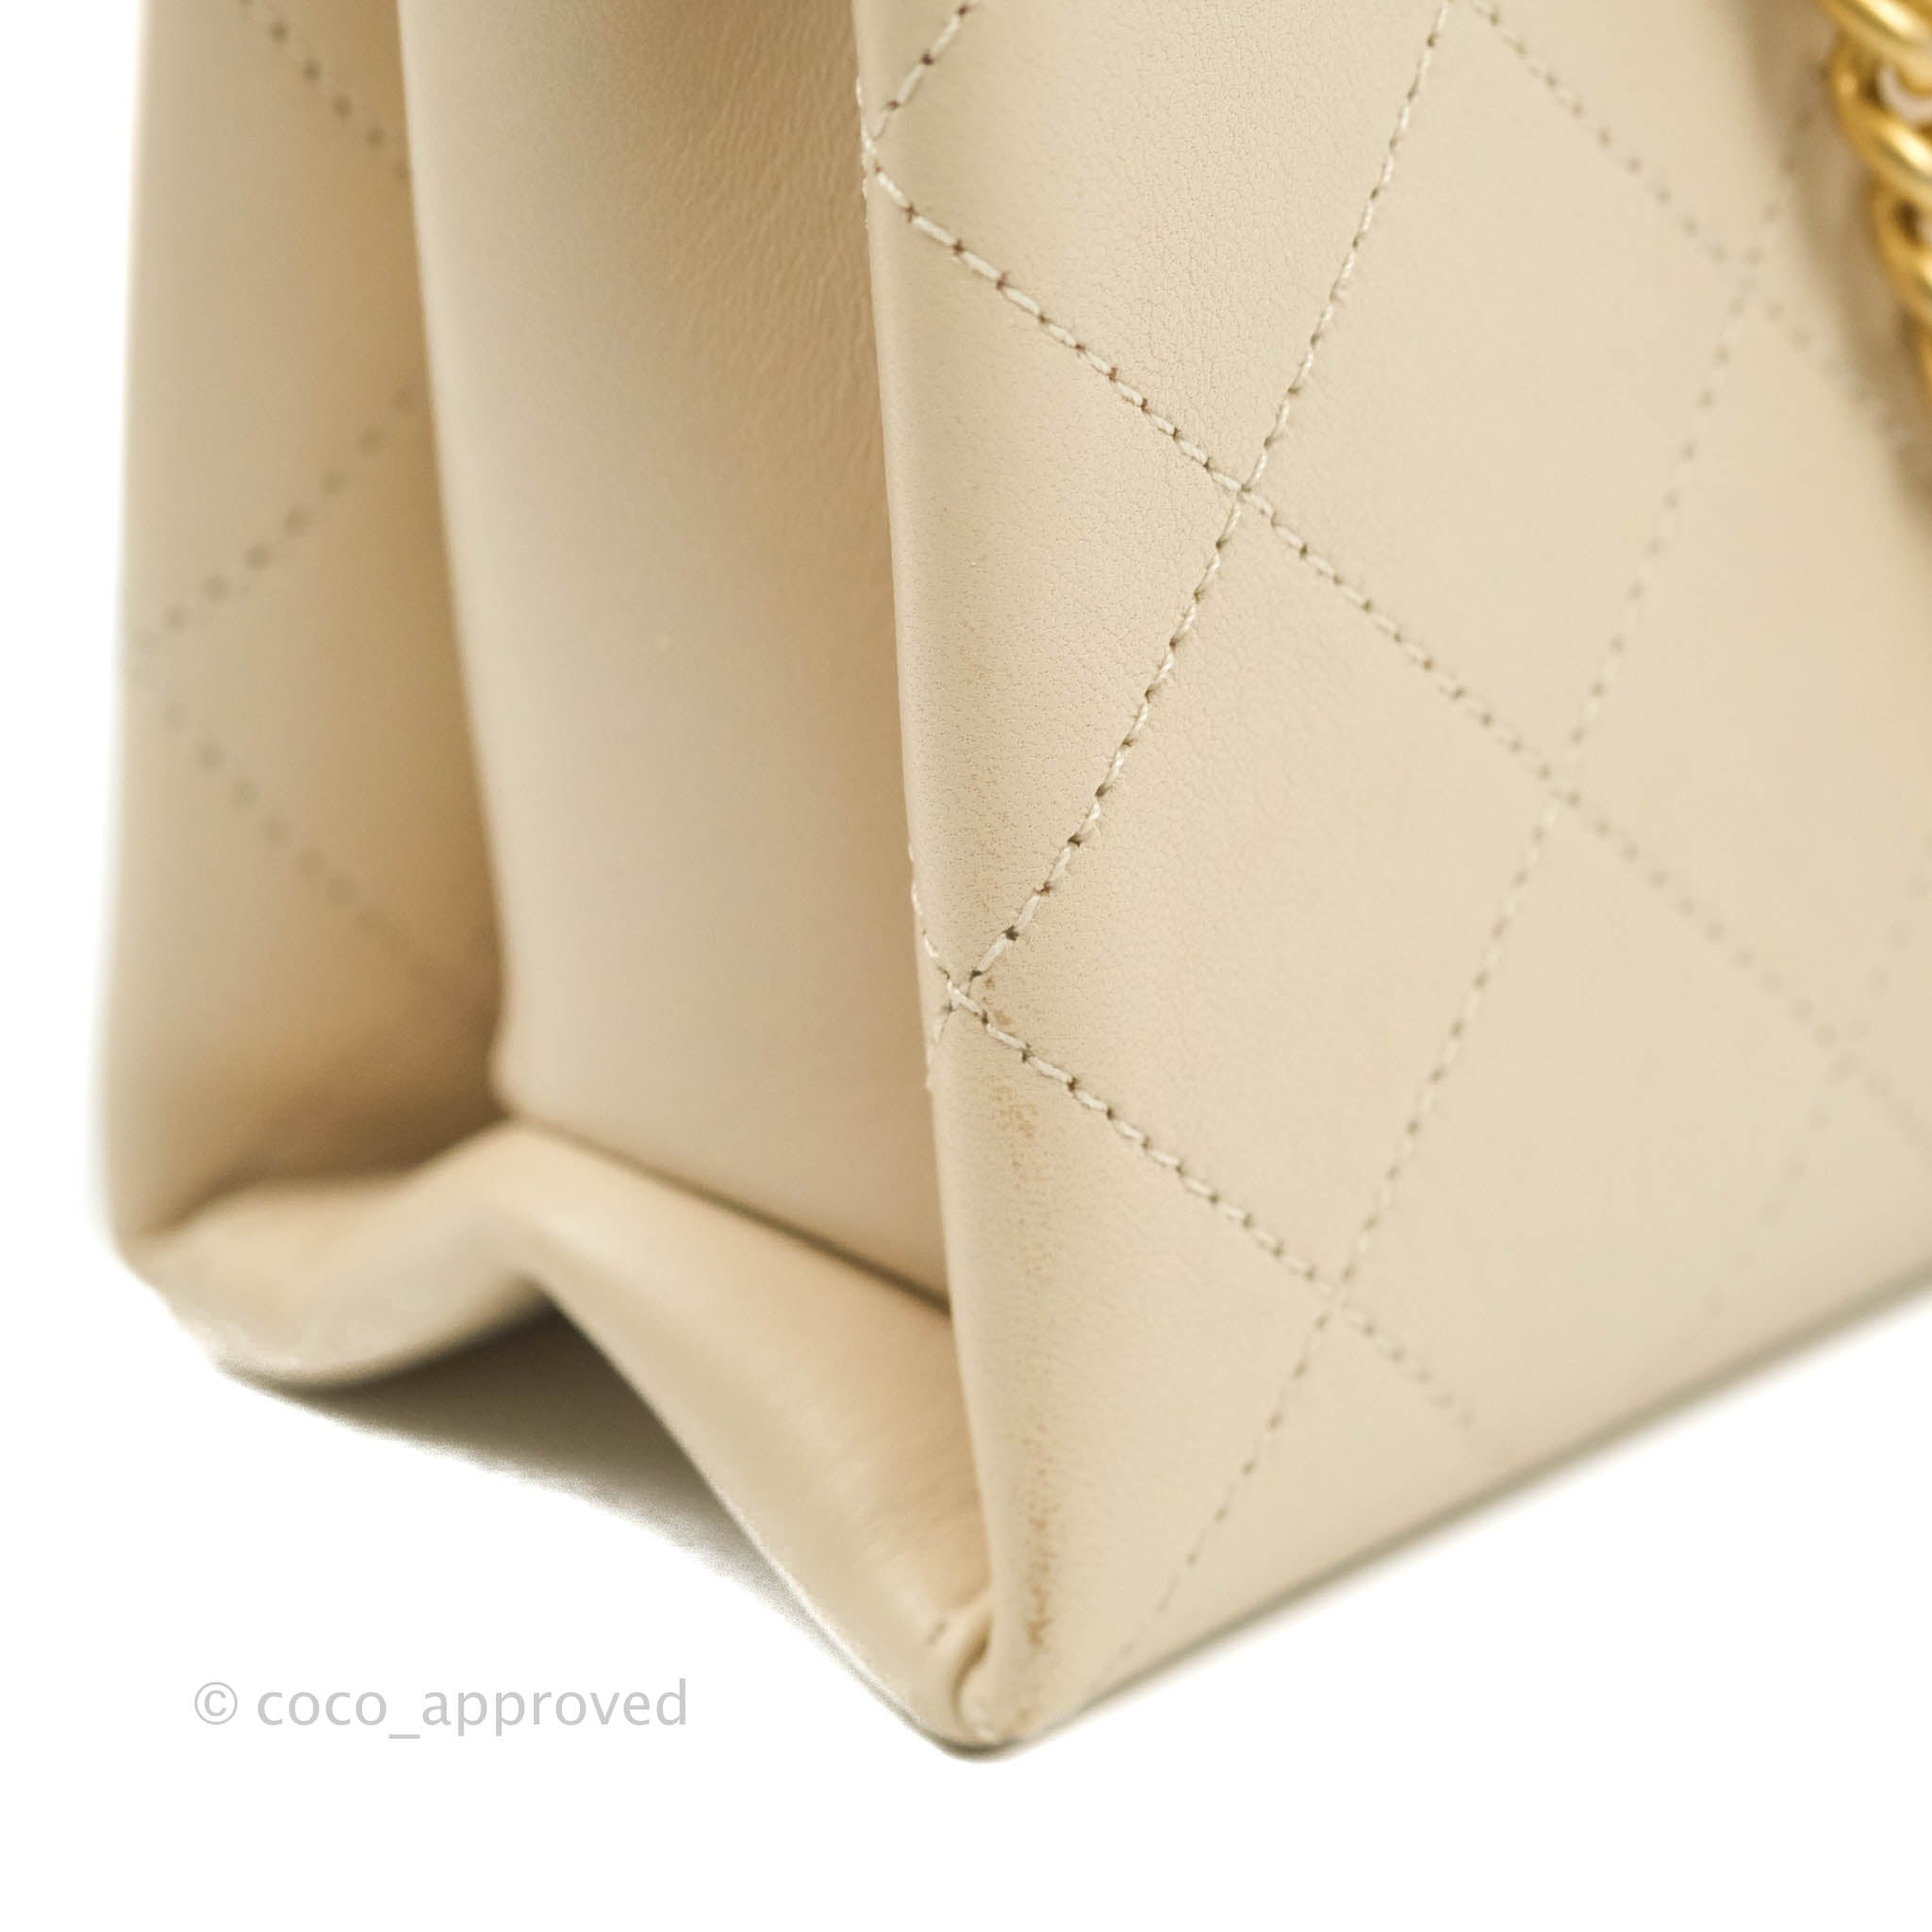 Chanel Small Coco Luxe Flap Bag